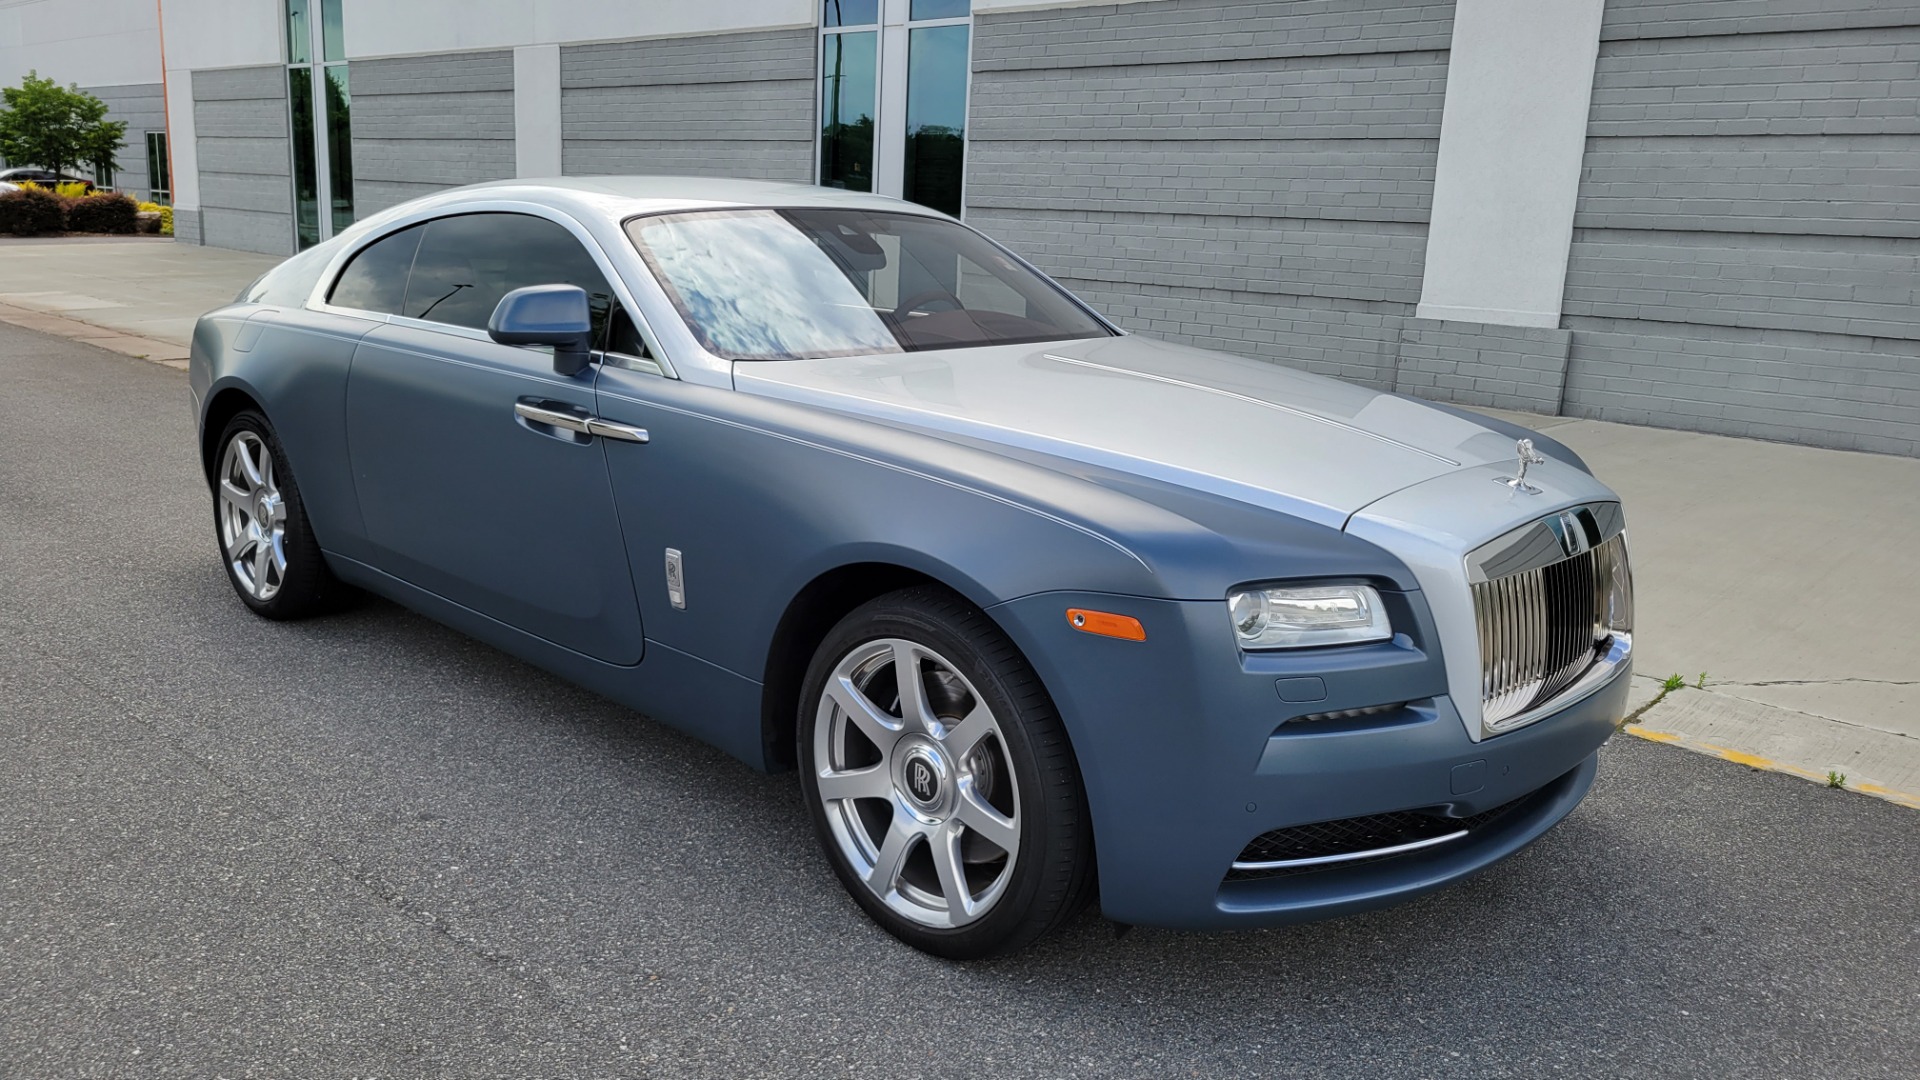 Used 2016 Rolls-Royce WRAITH COUPE / 6.6L V12 624HP / 8-SPD AUTO / NAV / STARLIGHT / REARVIEW for sale Sold at Formula Imports in Charlotte NC 28227 3